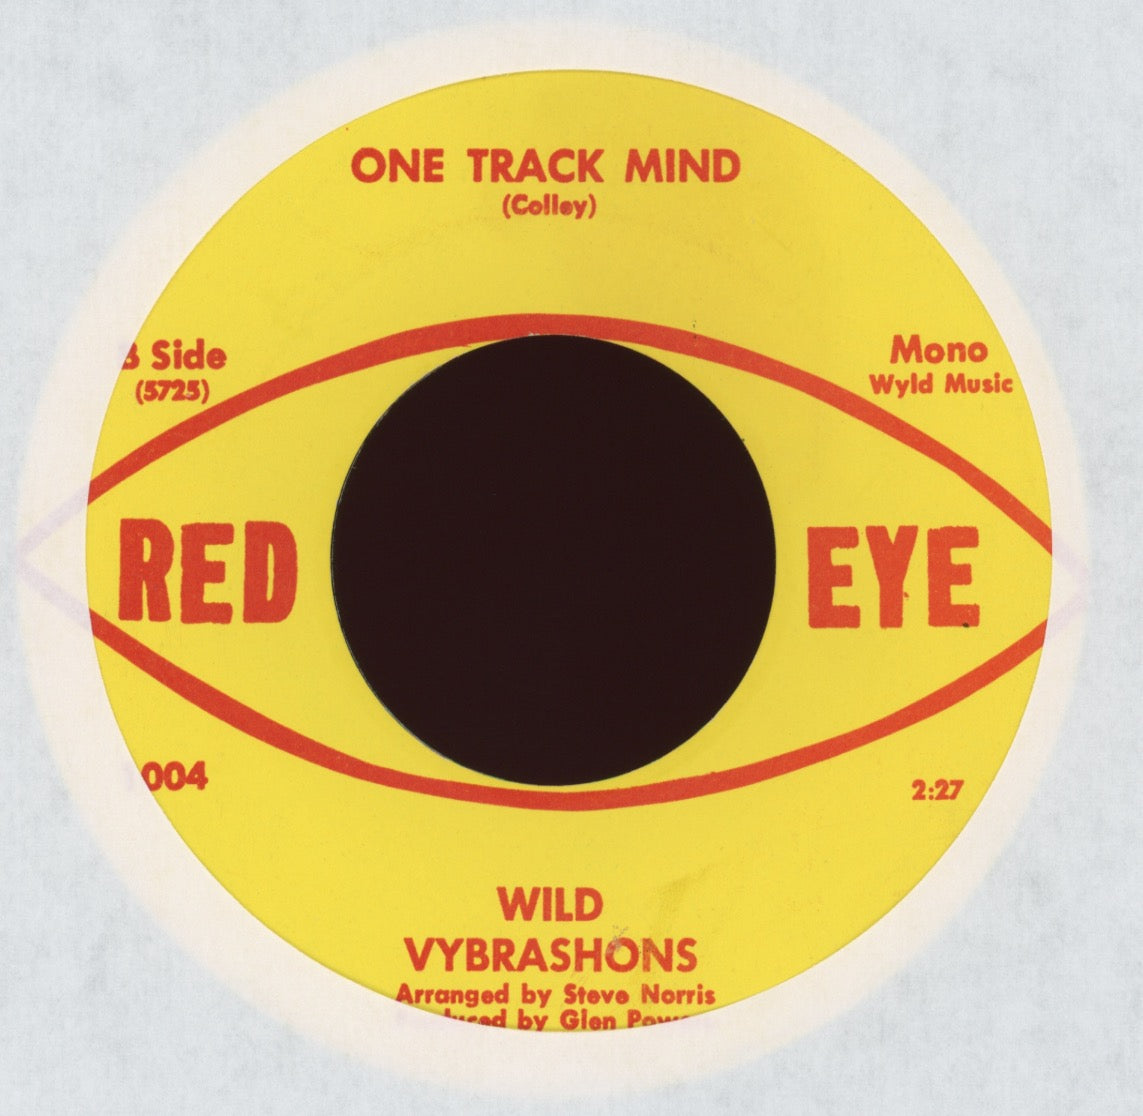 Wild Vybrashons - A Place In The Sun on Red Eye